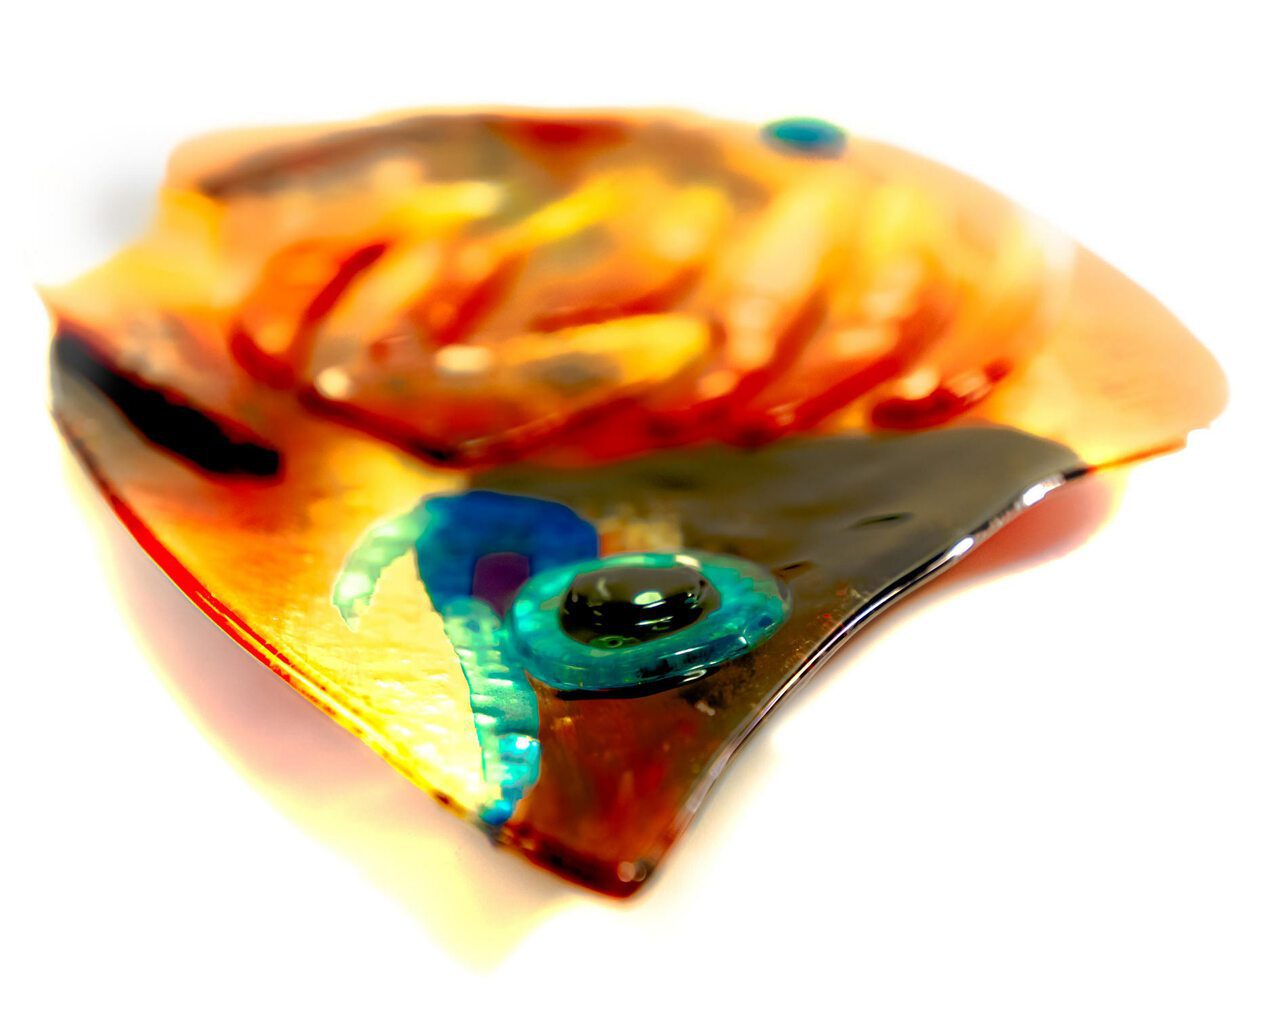 Laying flat as platter, the fused glass tropical fish as viewed intimately, into one another's eyes.